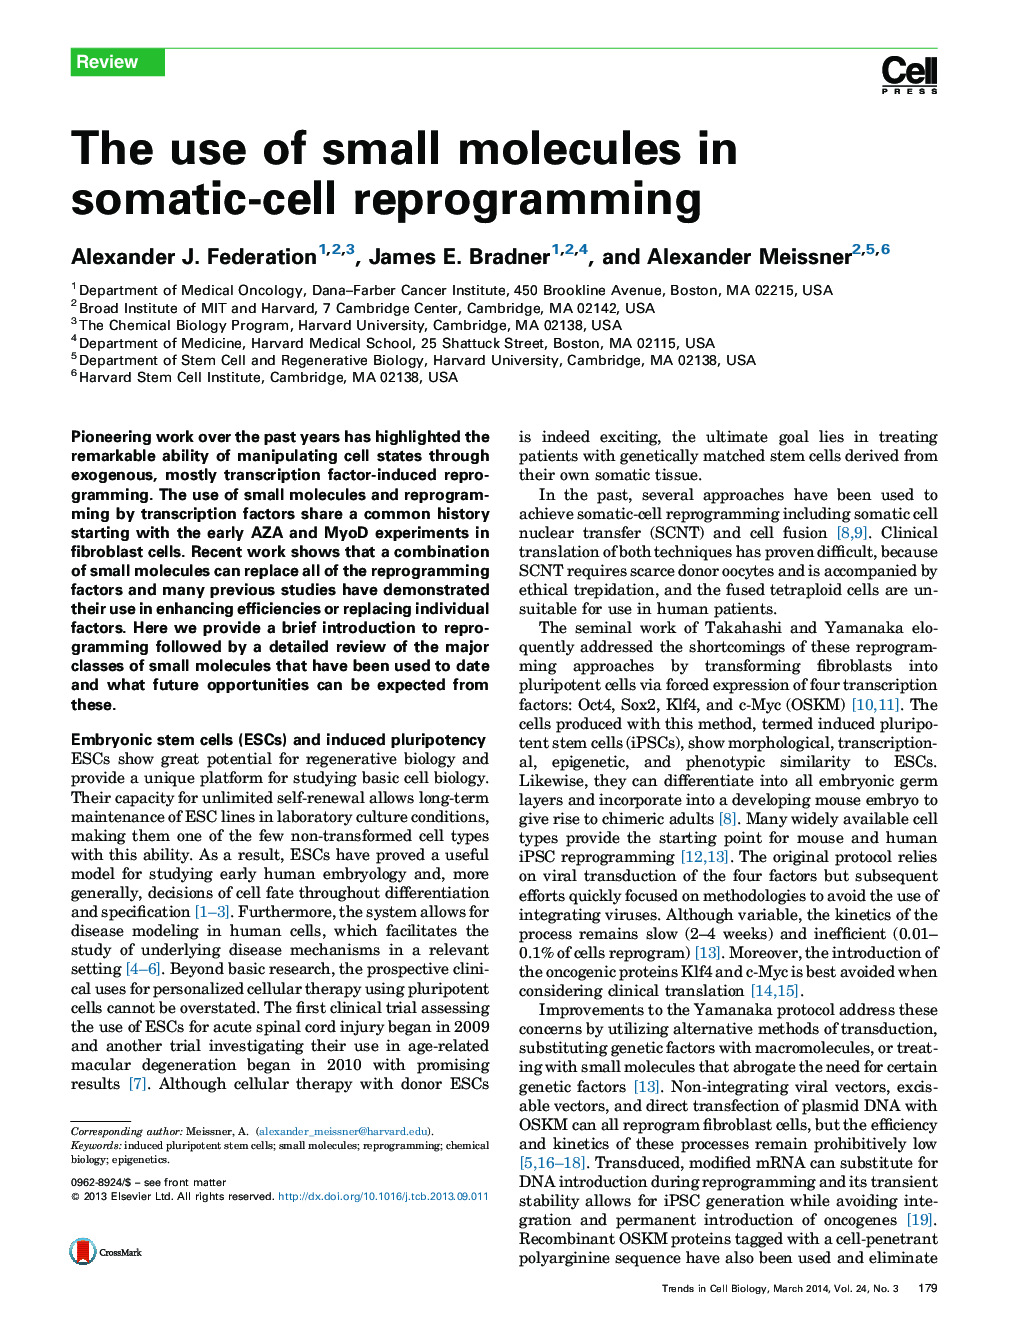 The use of small molecules in somatic-cell reprogramming